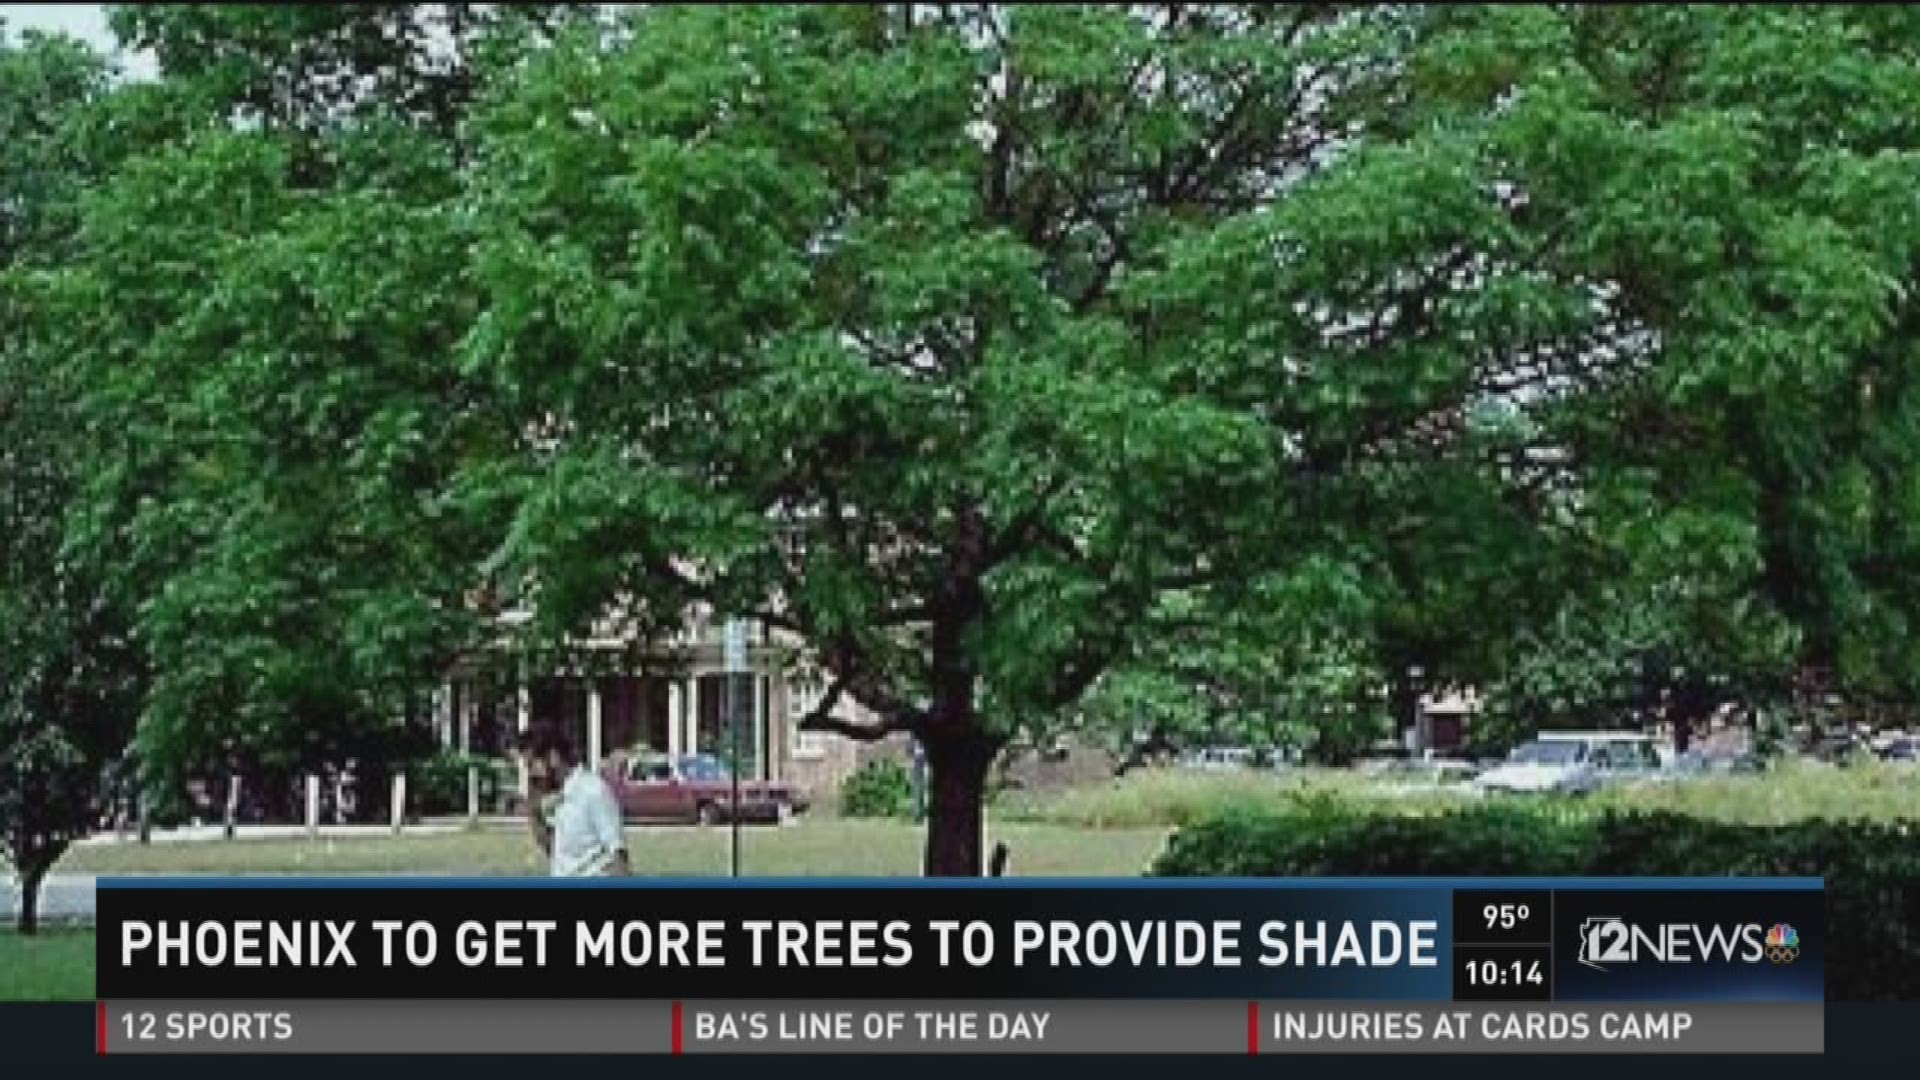 Phoenix to get more trees to provide shade